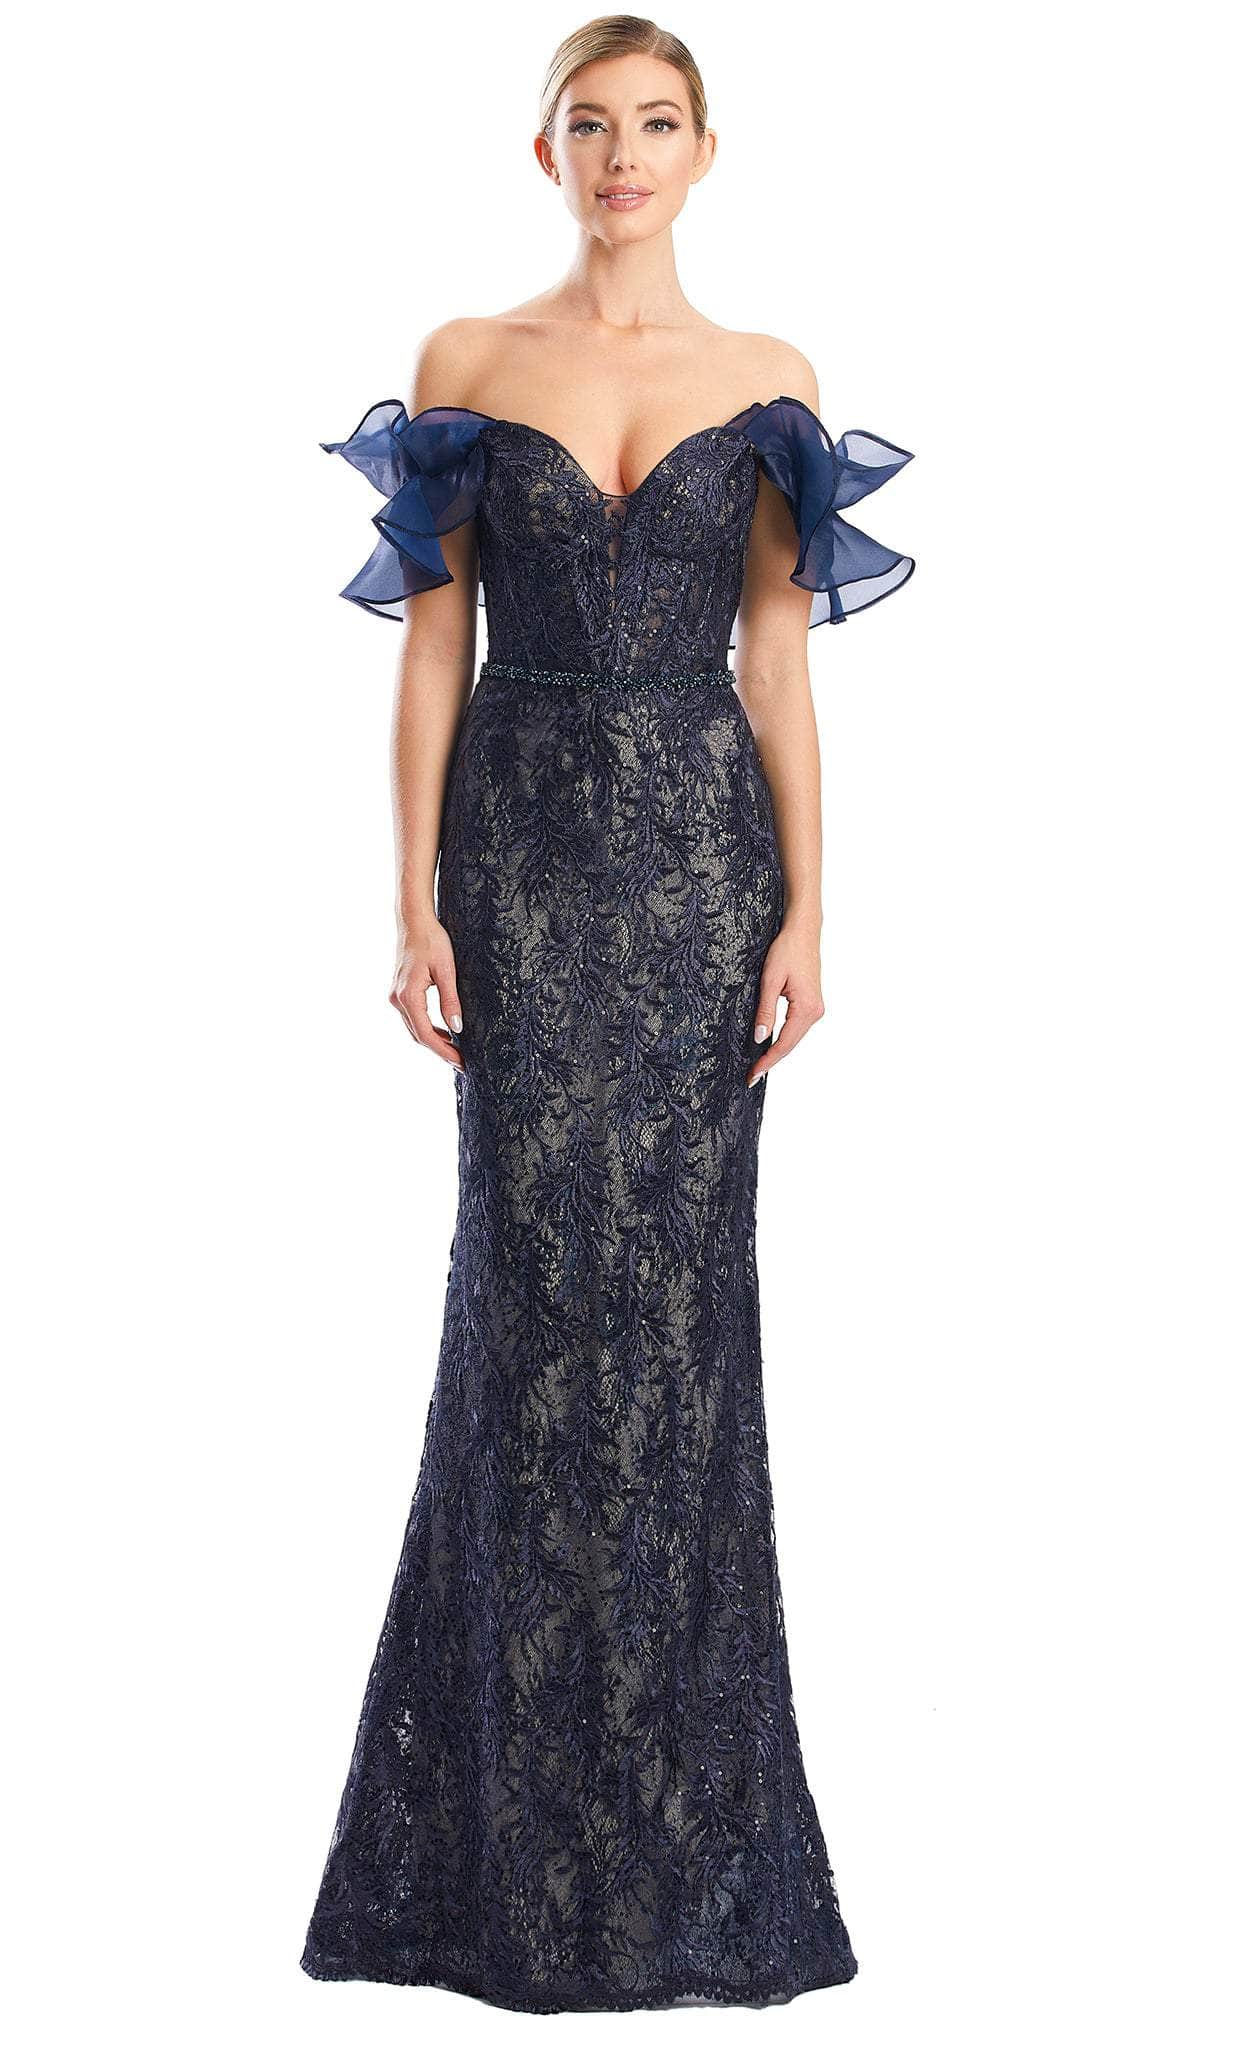 Alexander by Daymor 1774S23 - Ruffled Sleeve Sweetheart Lace Gown Evening Dresses 00 / Navy